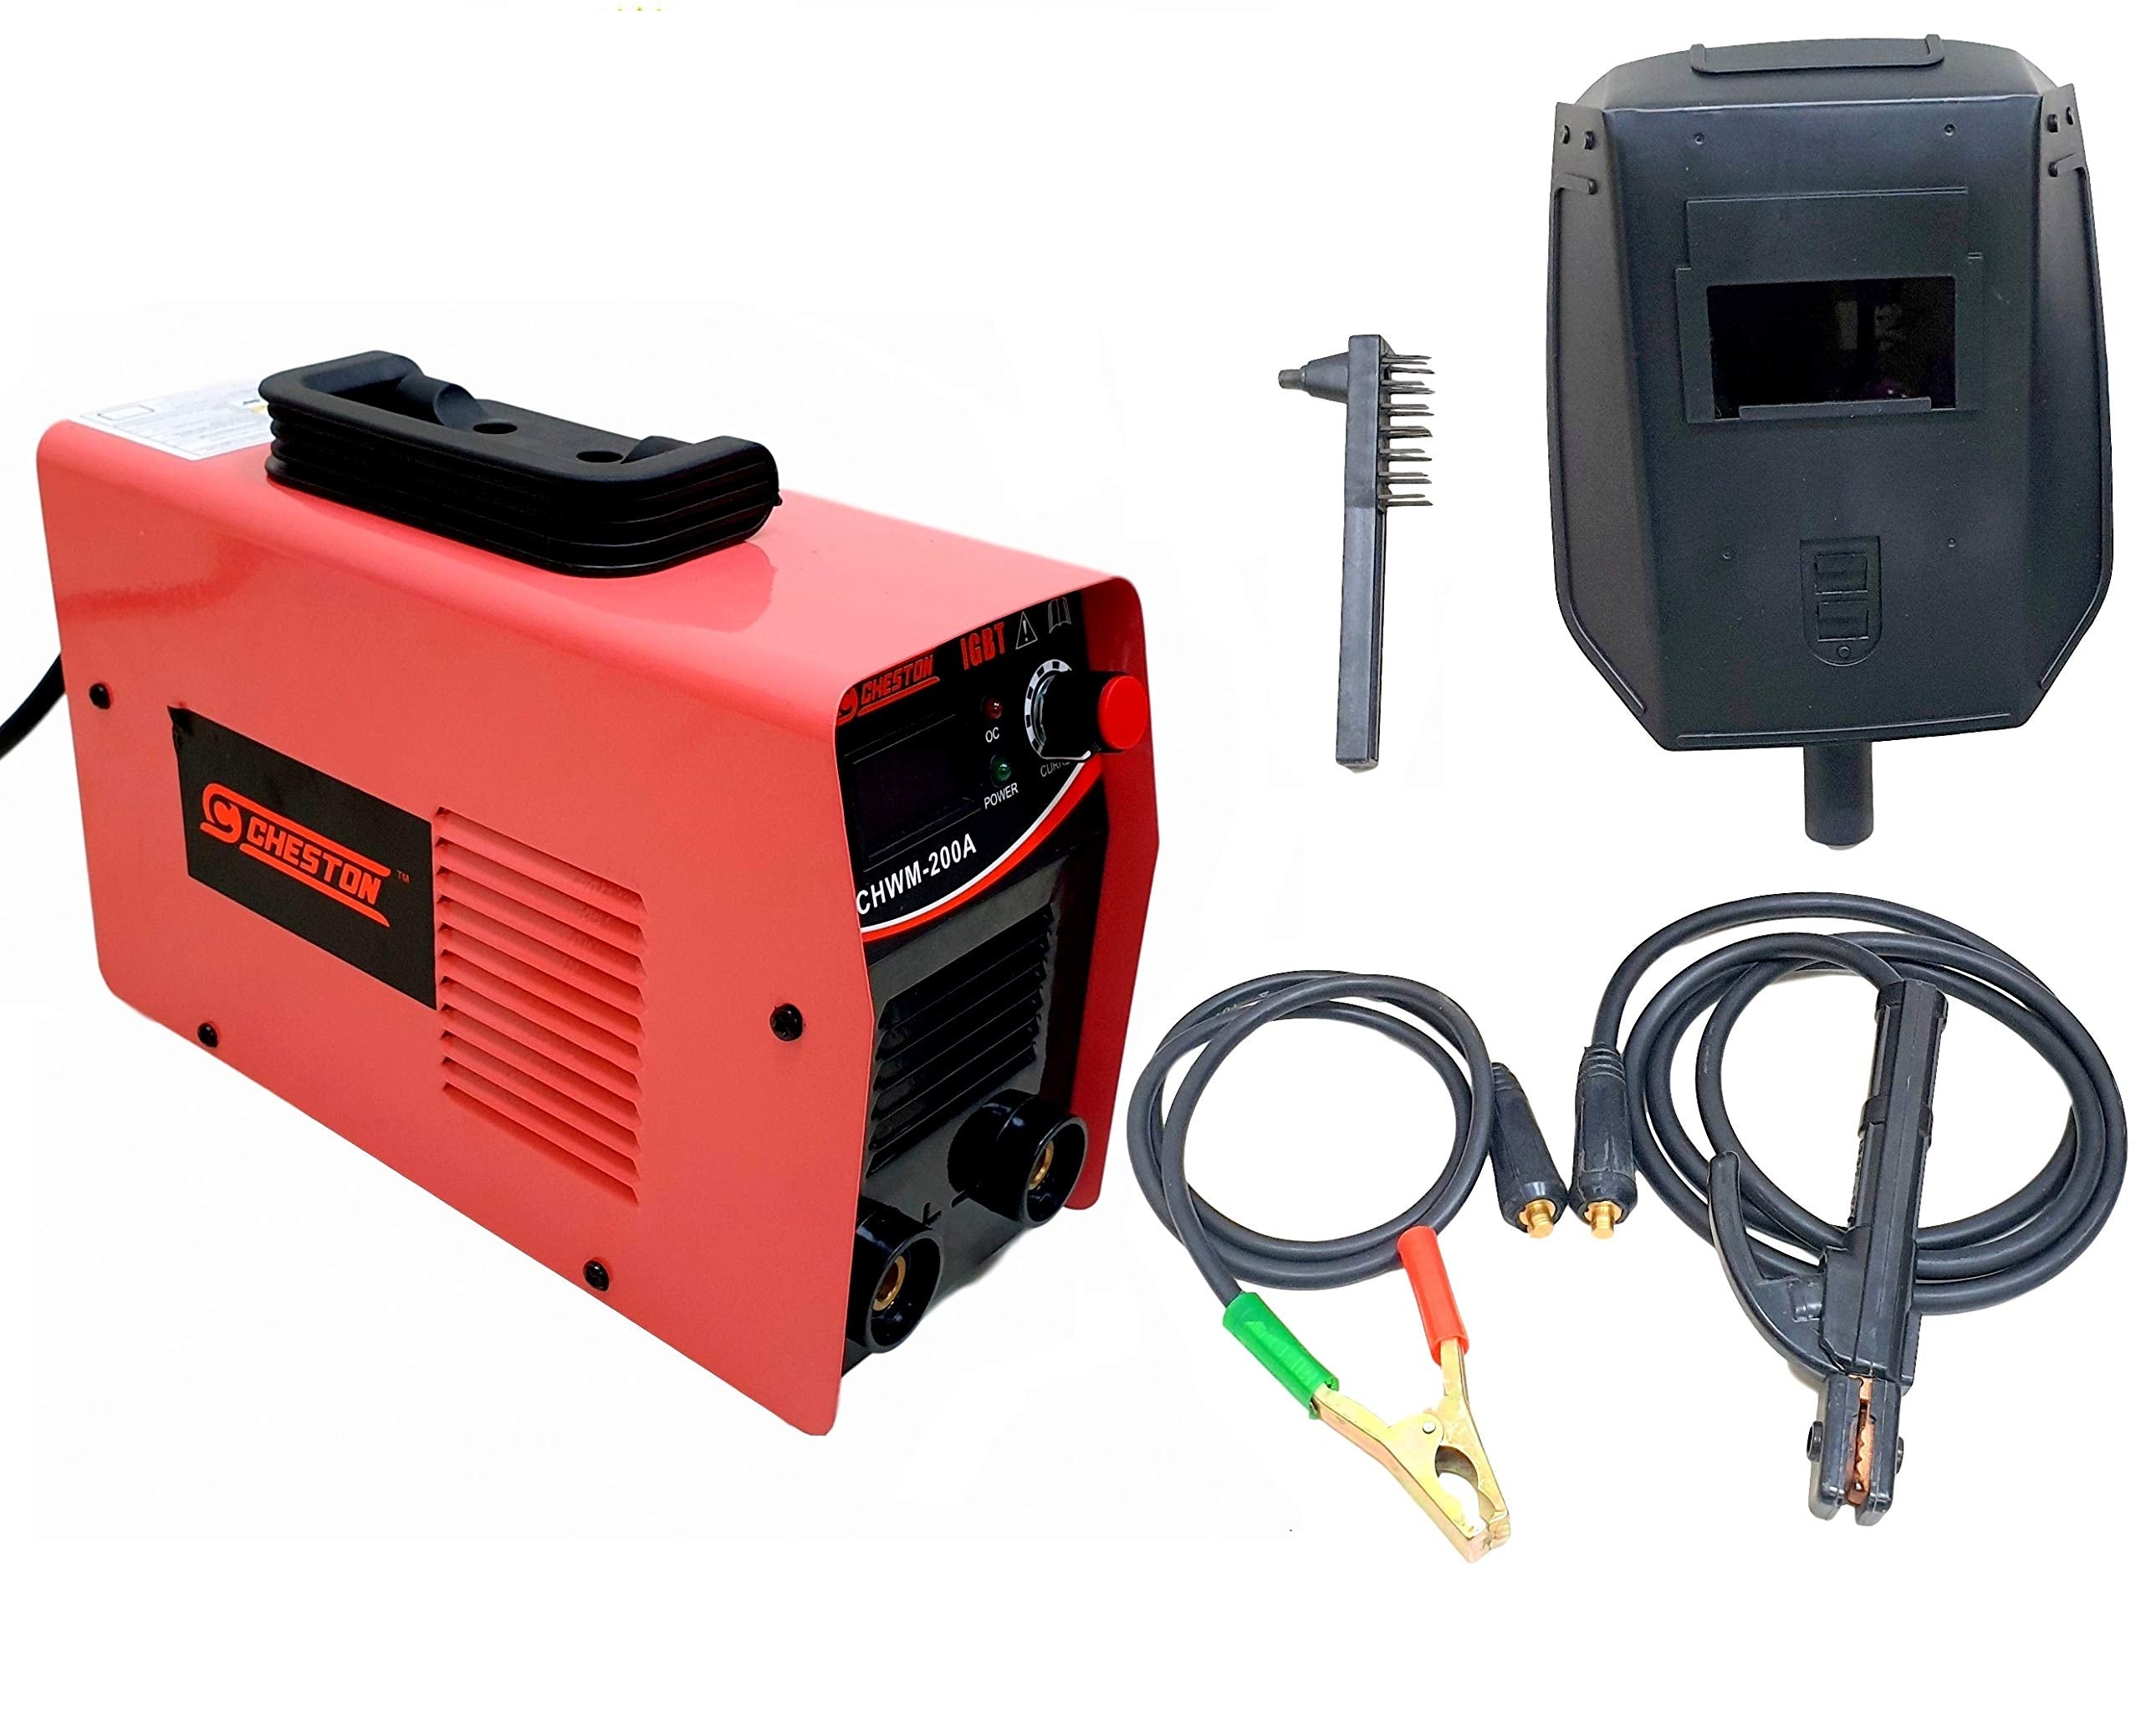 Cheston Inverter ARC Welding Machine (IGBT) 200A with Hot Start, Anti-Stick Functions, Arc Force Control with All Accessories